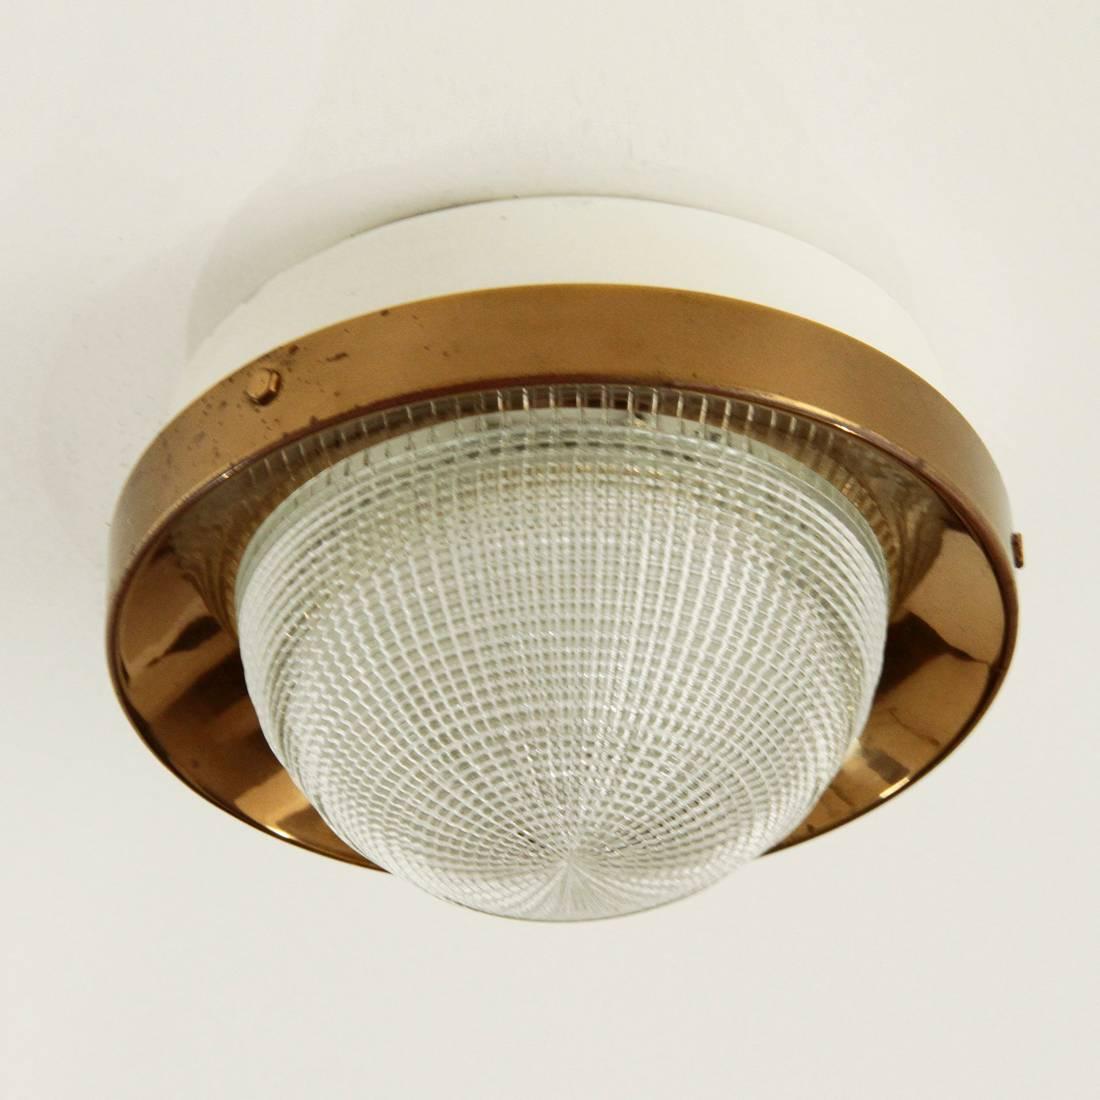 Wall lamp from the 1950s produced by Stilnovo.
Structure in white painted metal and brass
Glass diffuser.
Good general conditions, some signs on the structure.

Dimensions: Diameter 16 cm - Height 10 cm.